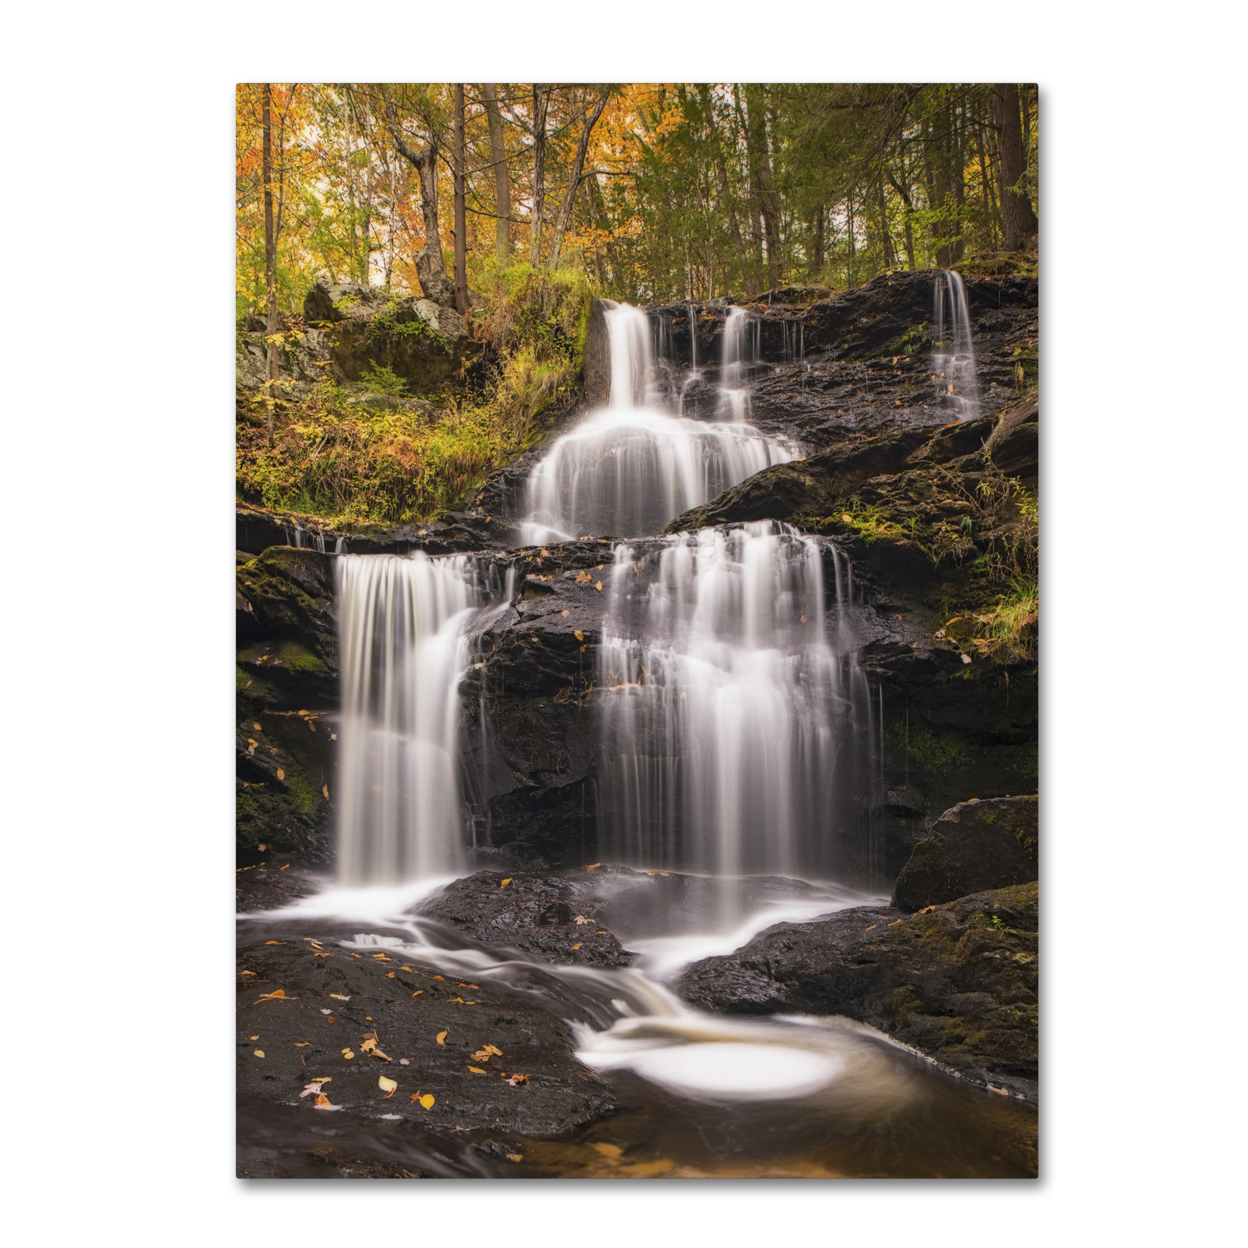 Michael Blanchette Photography 'Autumn Horsetails' Canvas Wall Art 35 X 47 Inches